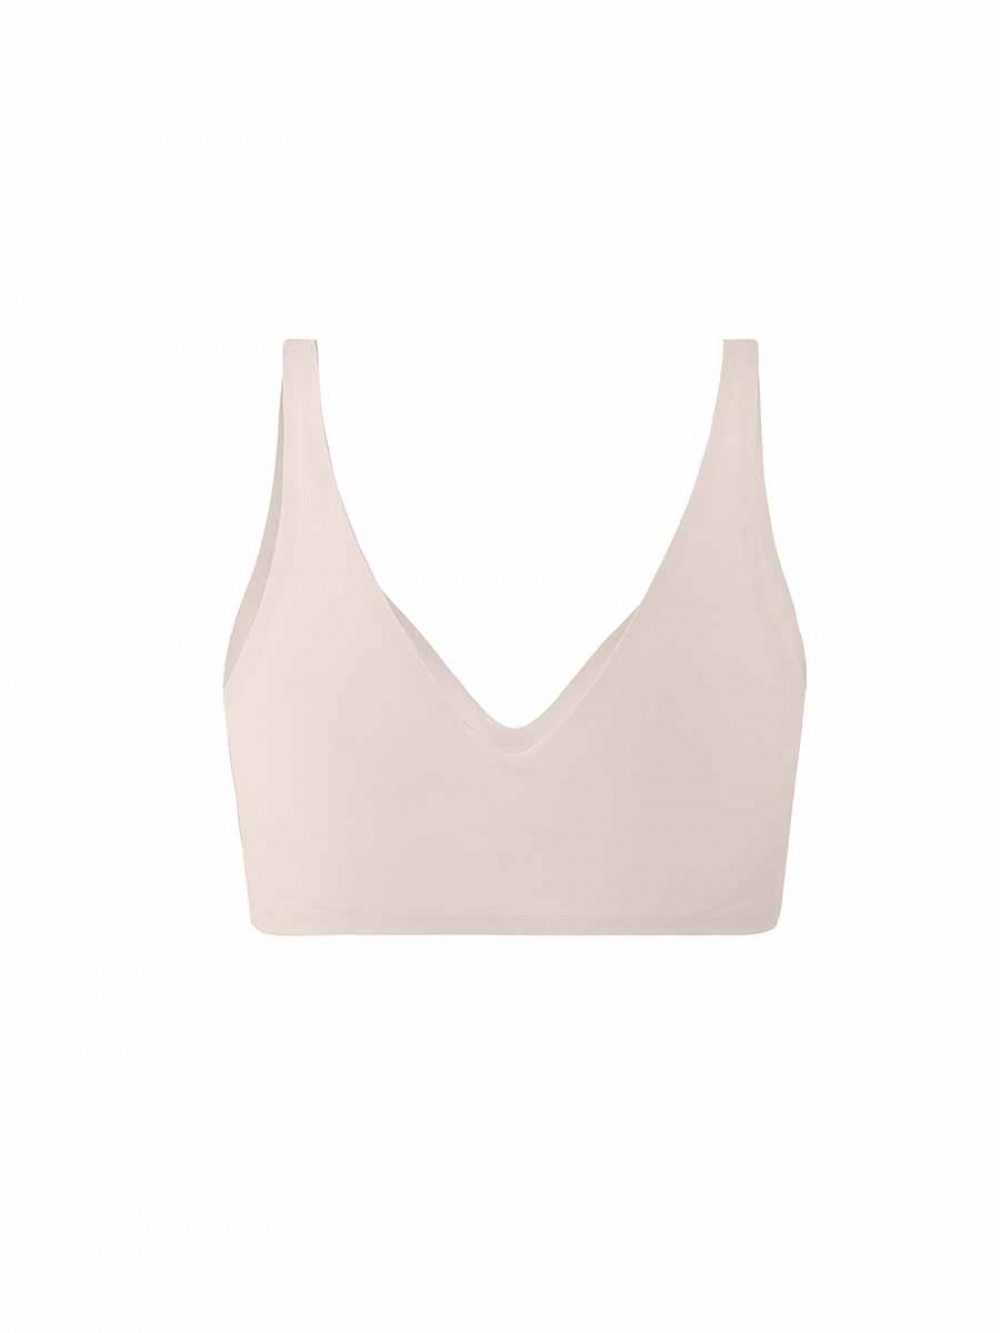 Nude Wholesale Soft High Quality Seamless Bra Superior Comfort Smoothing Fabric